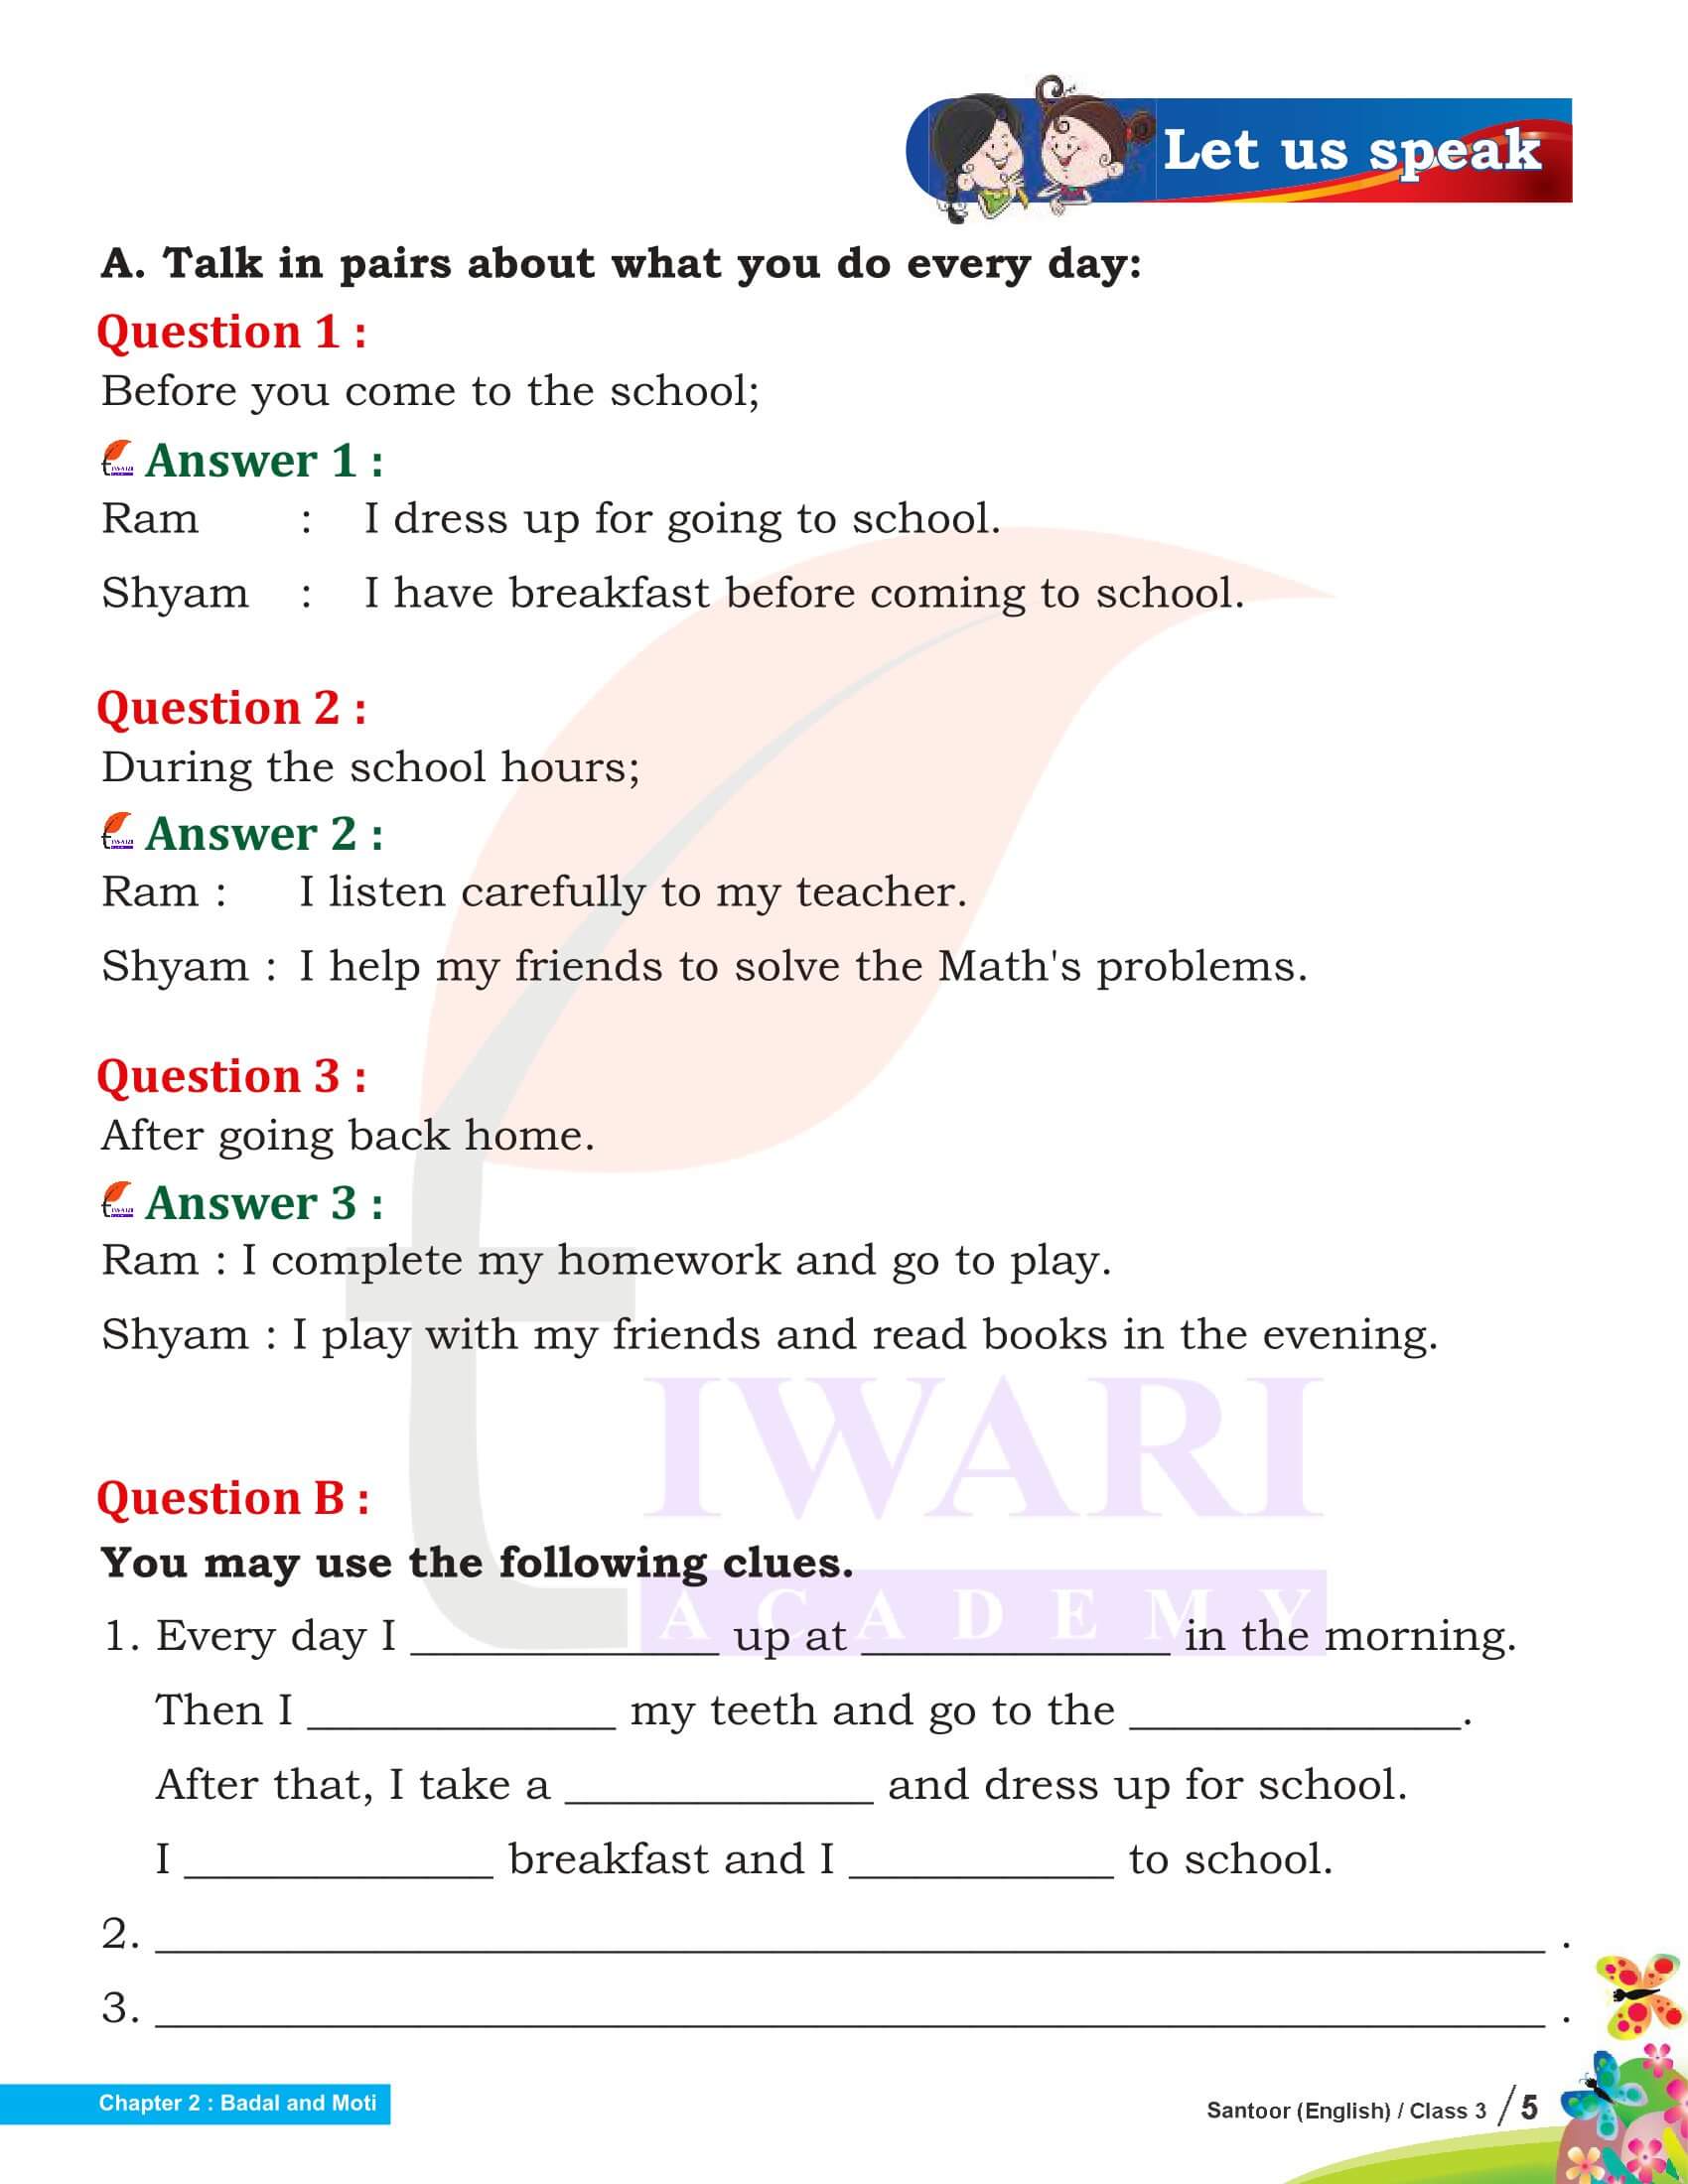 Class 3 English Santoor Chapter 2 Answers